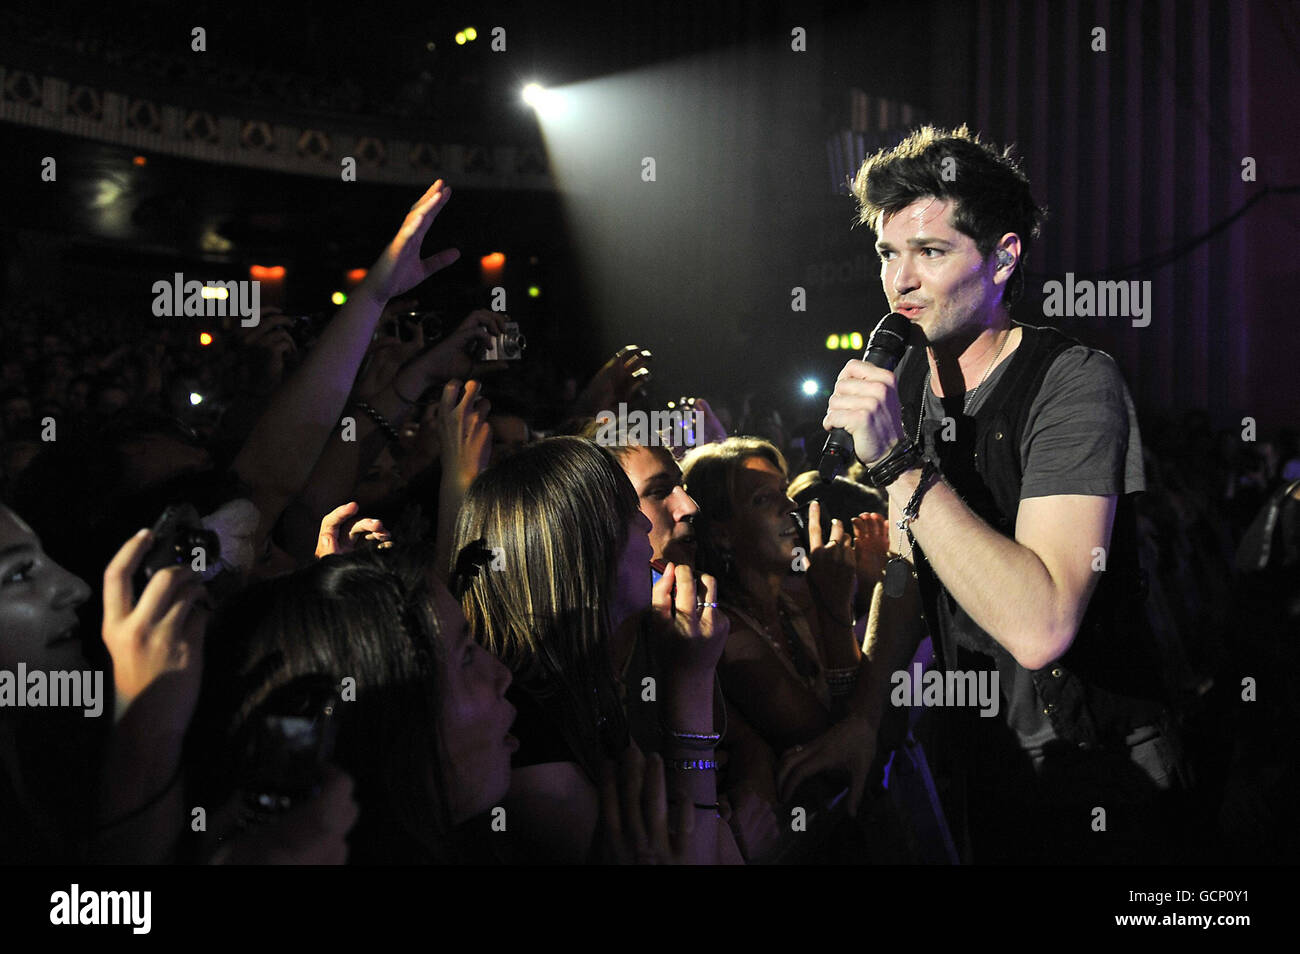 The Script in concert - London. Danny O'Donoghue of The Script performing at the Hammersmith Apollo in west London. Stock Photo